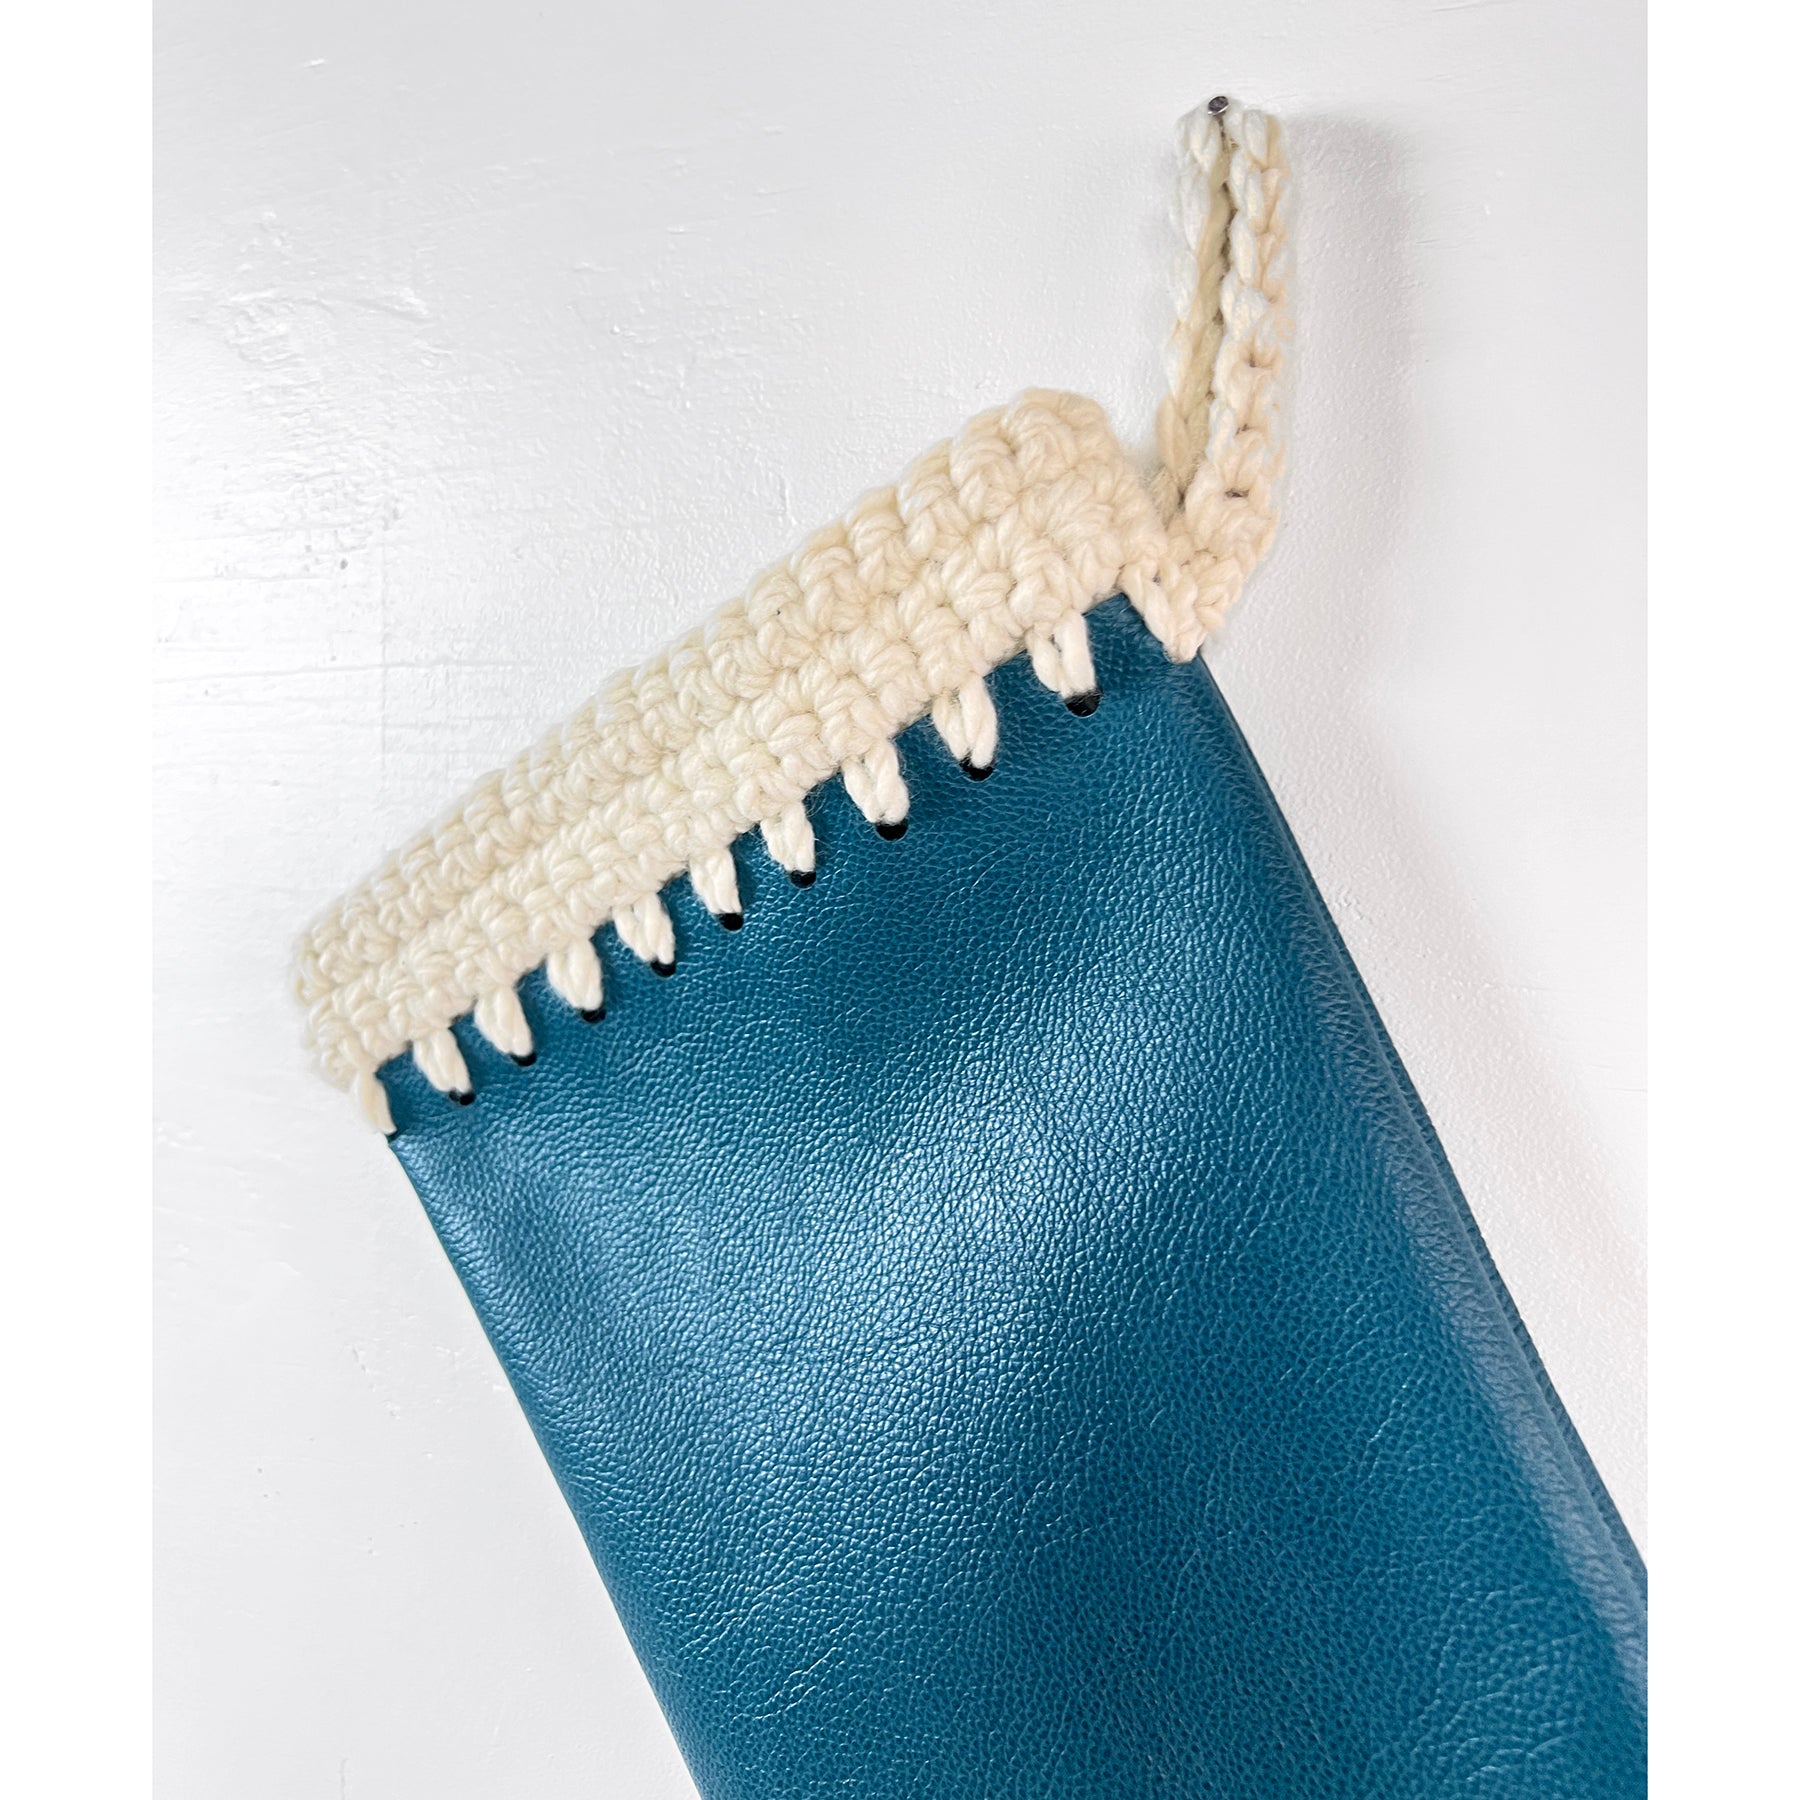 Teal Leather with Cream Hand Crochet Trim Christmas Stocking